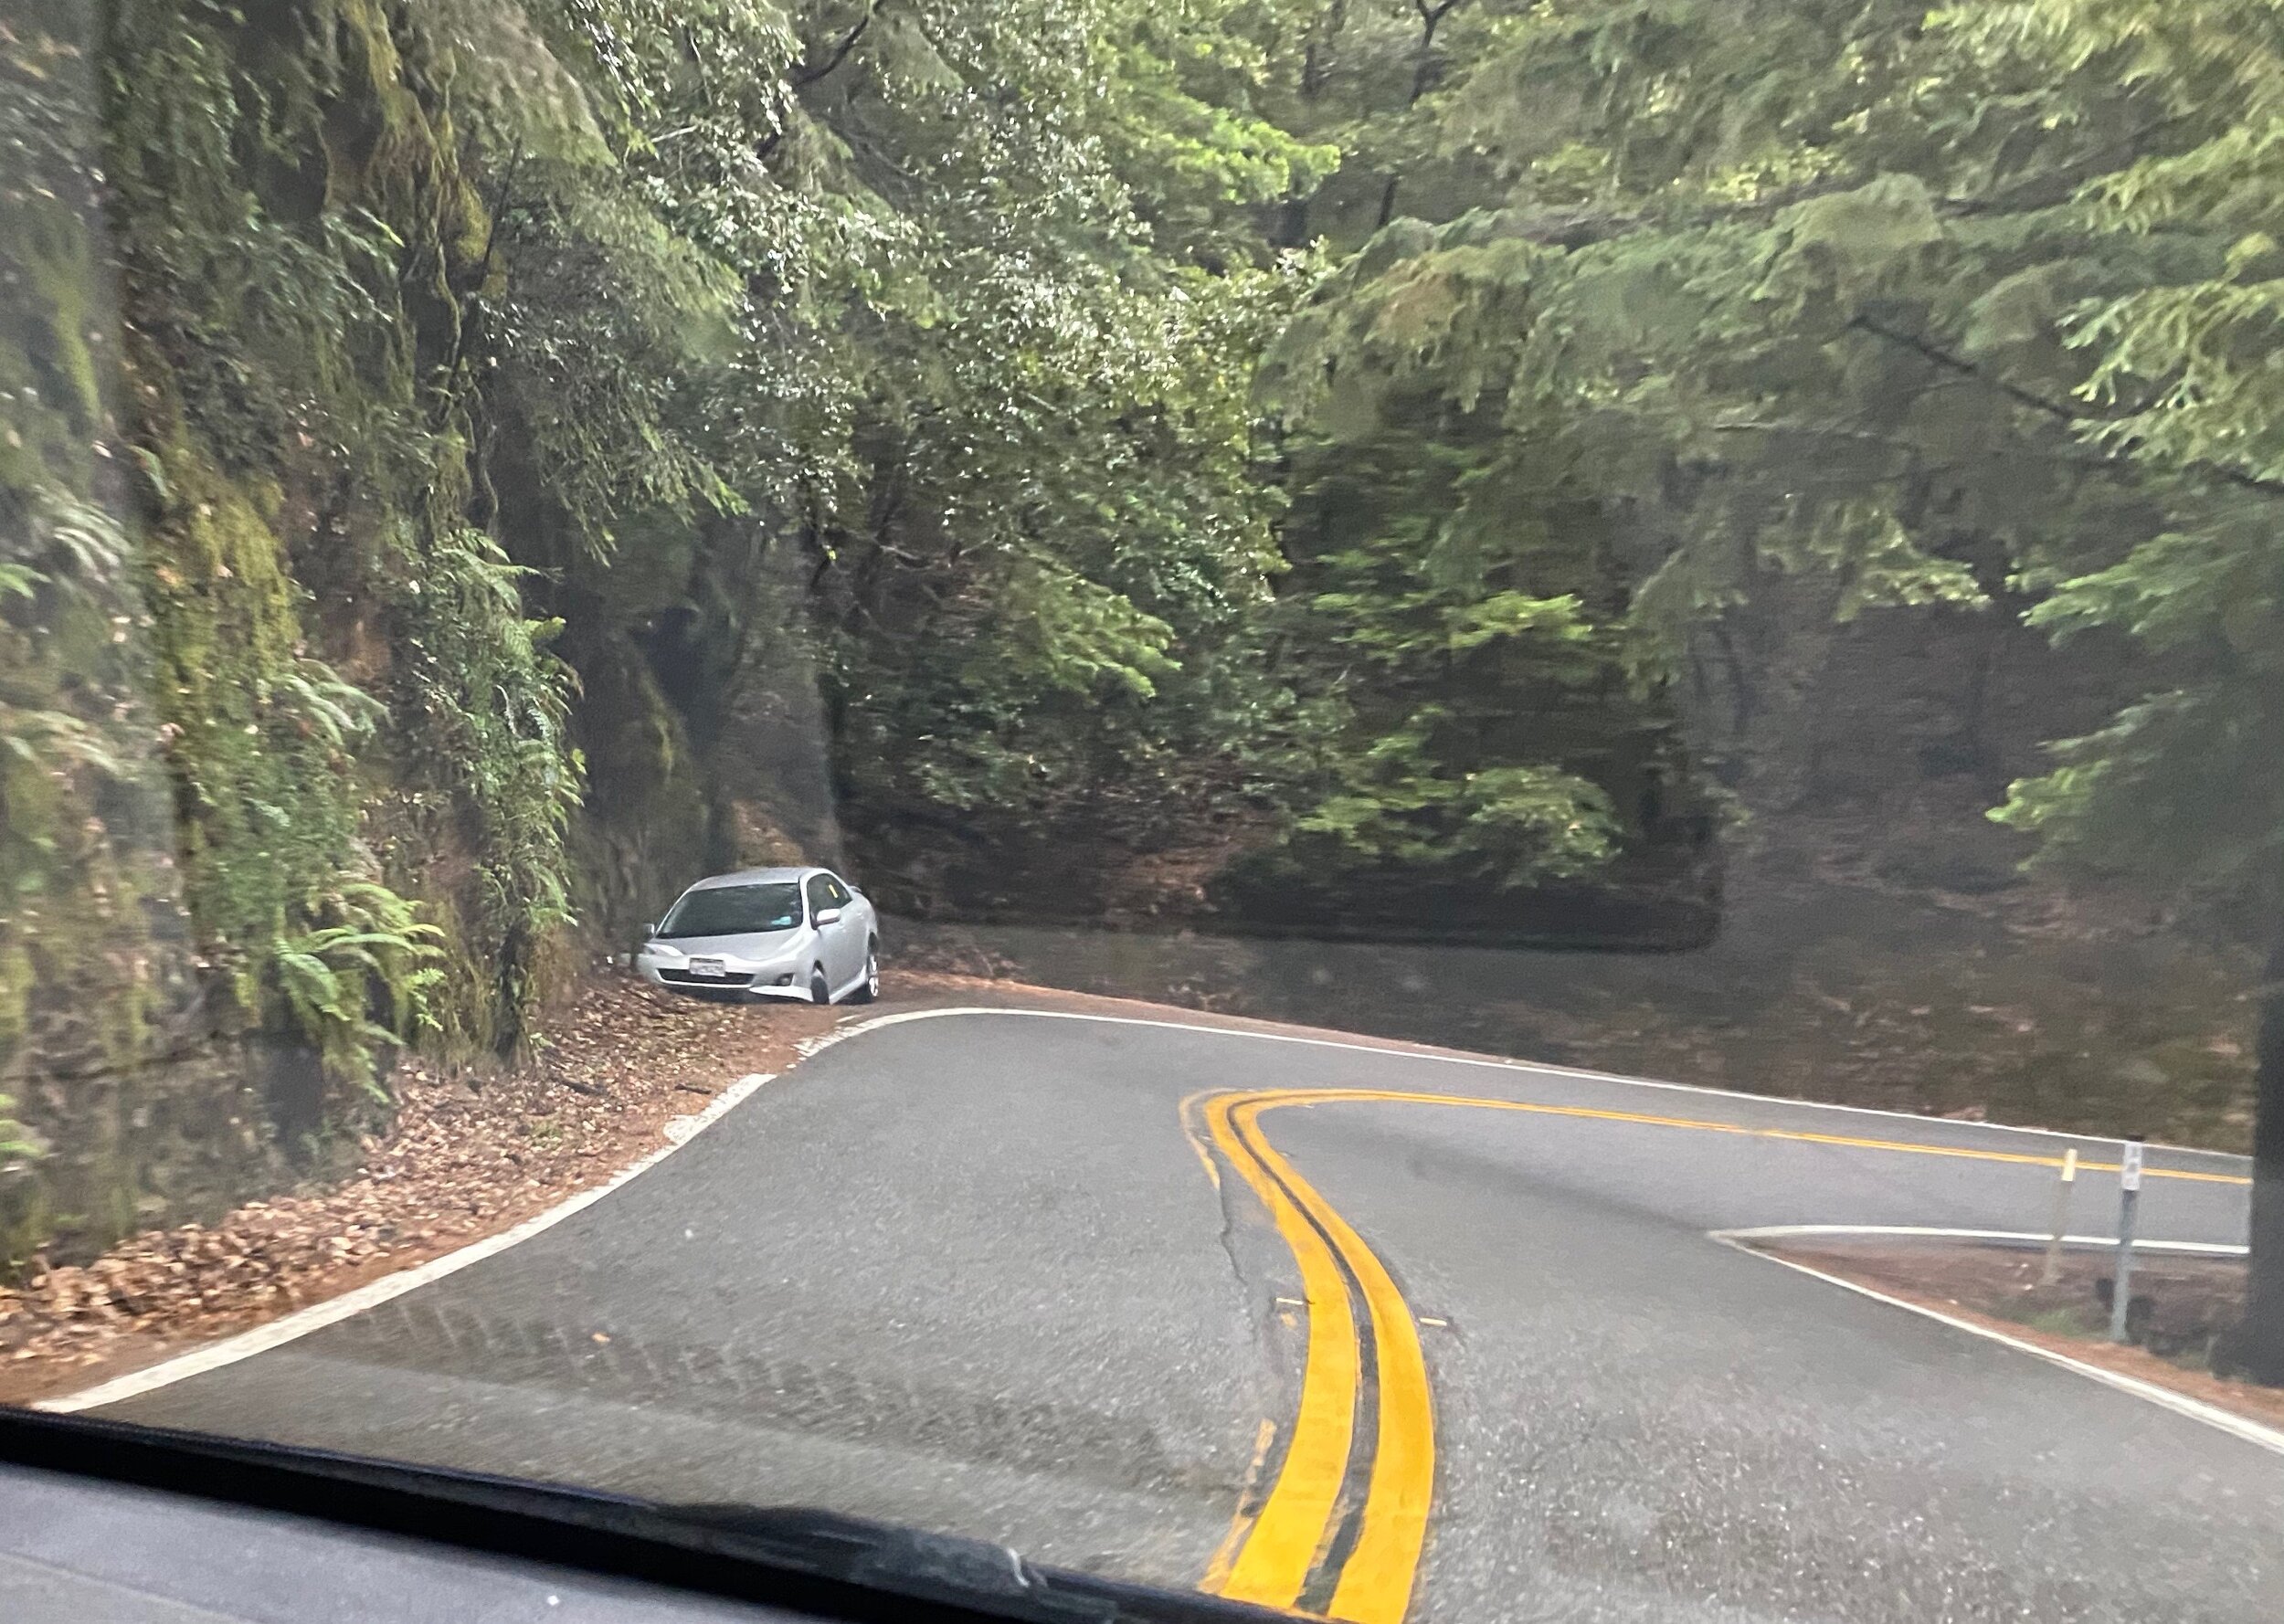 A good lesson for why it’s important to slow down around sharp curves, that car is really smashed in there if you look closely.)  Photo by Karen Boudreaux, June 11, 2021